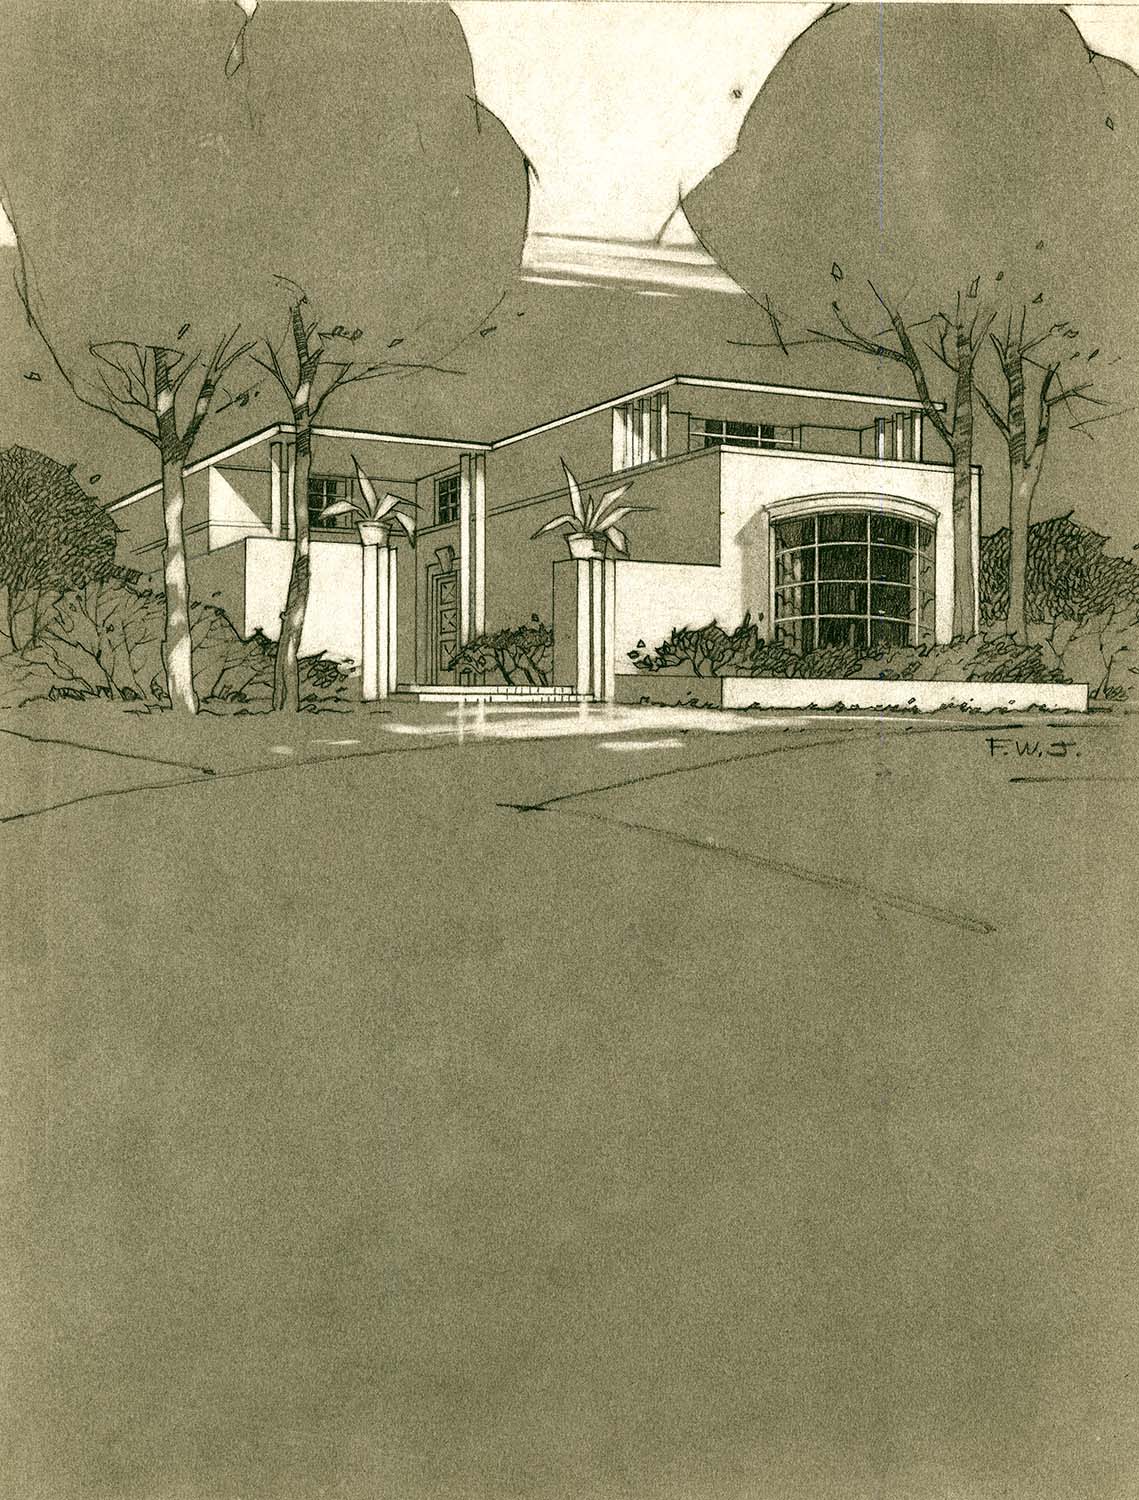 Paul Revere Williams, Drawing of "New Londoner" residence for 'New Homes for Today' (1946)